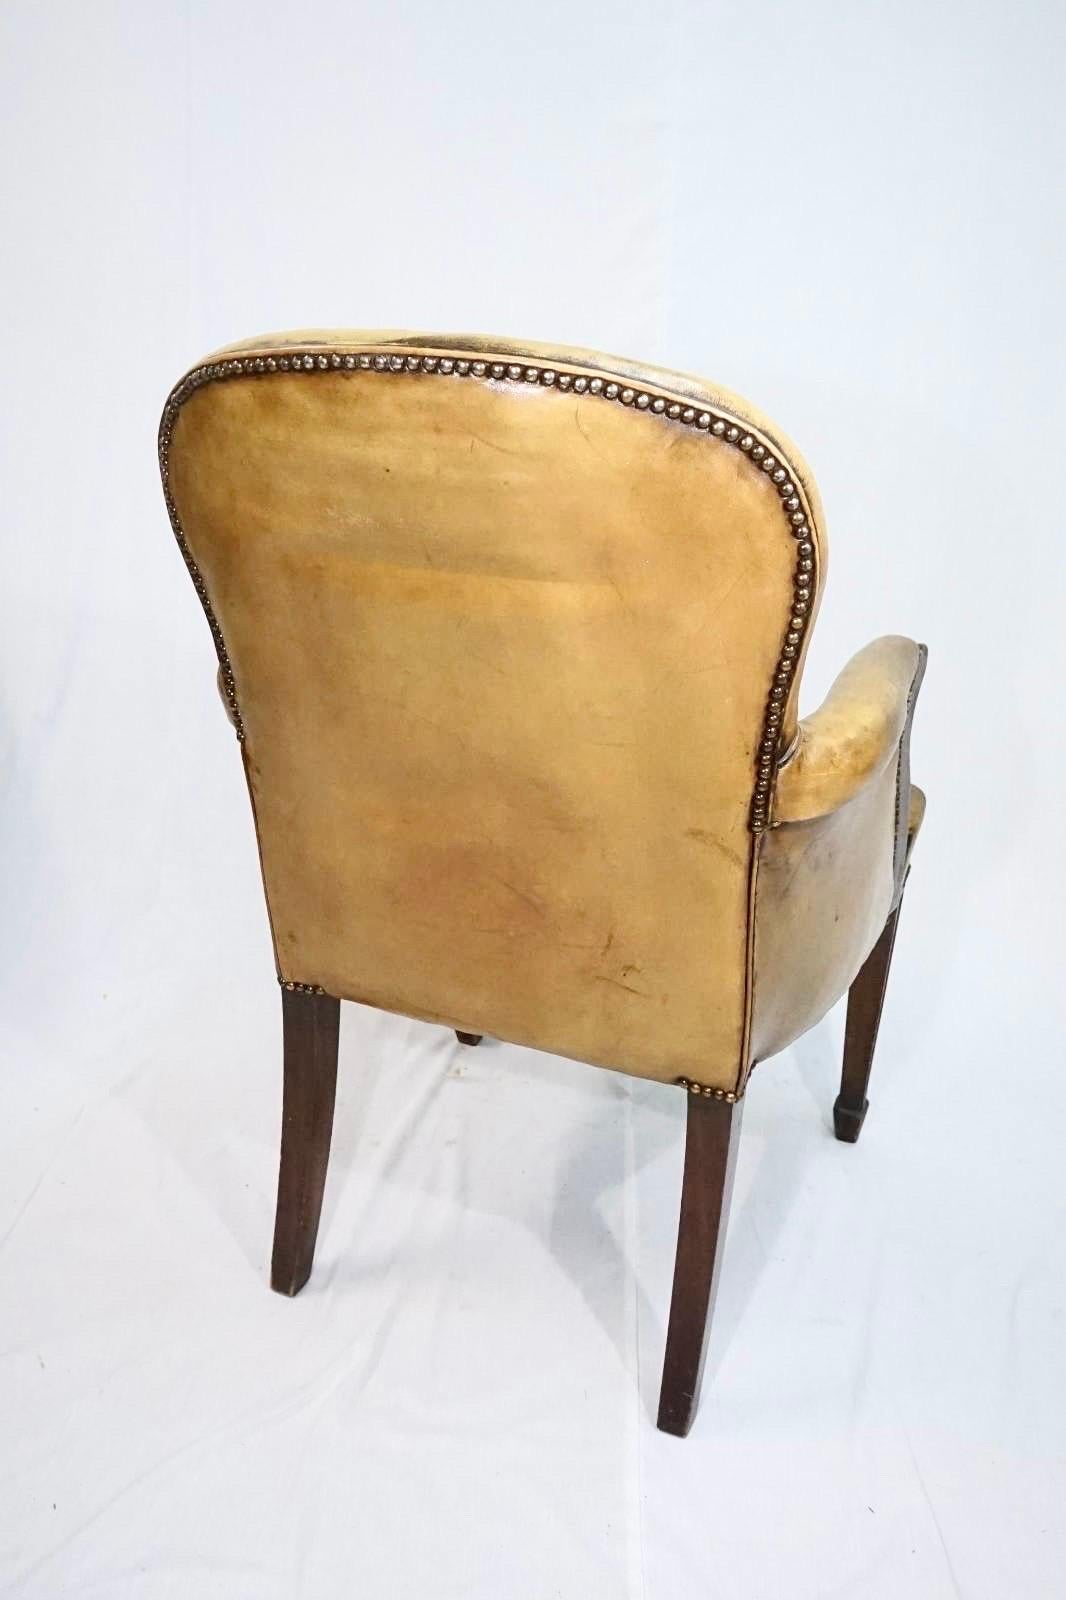 Patinated Easychair by Cabinetmaker Frits Henningsen in Stained Oak with Patinaed Leather